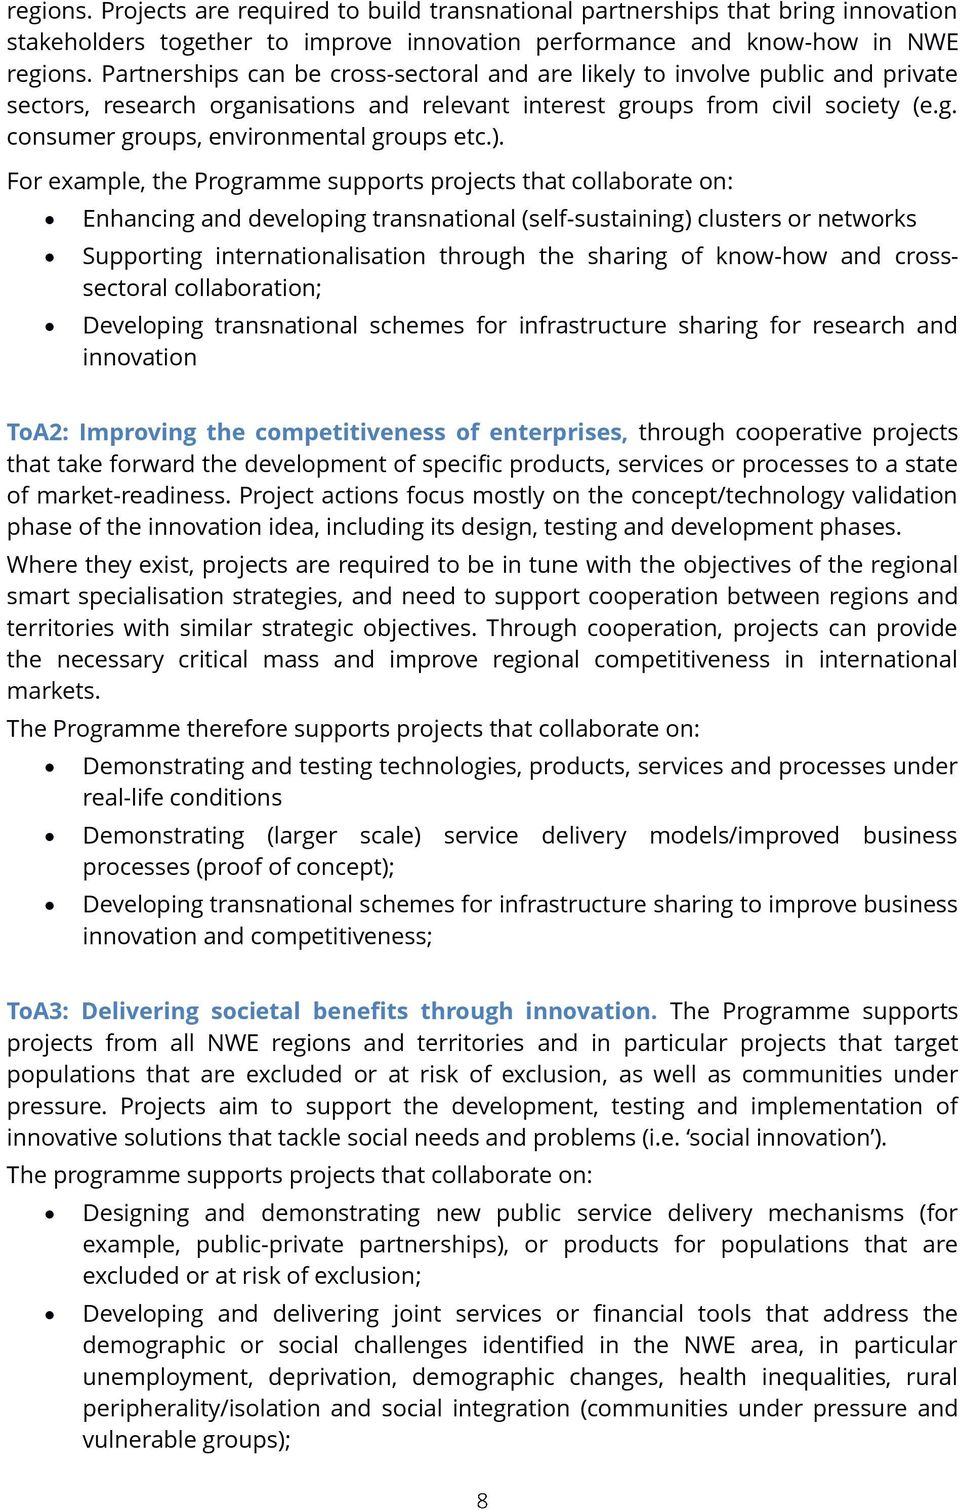 ). For example, the Programme supports projects that collaborate on: Enhancing and developing transnational (self-sustaining) clusters or networks Supporting internationalisation through the sharing